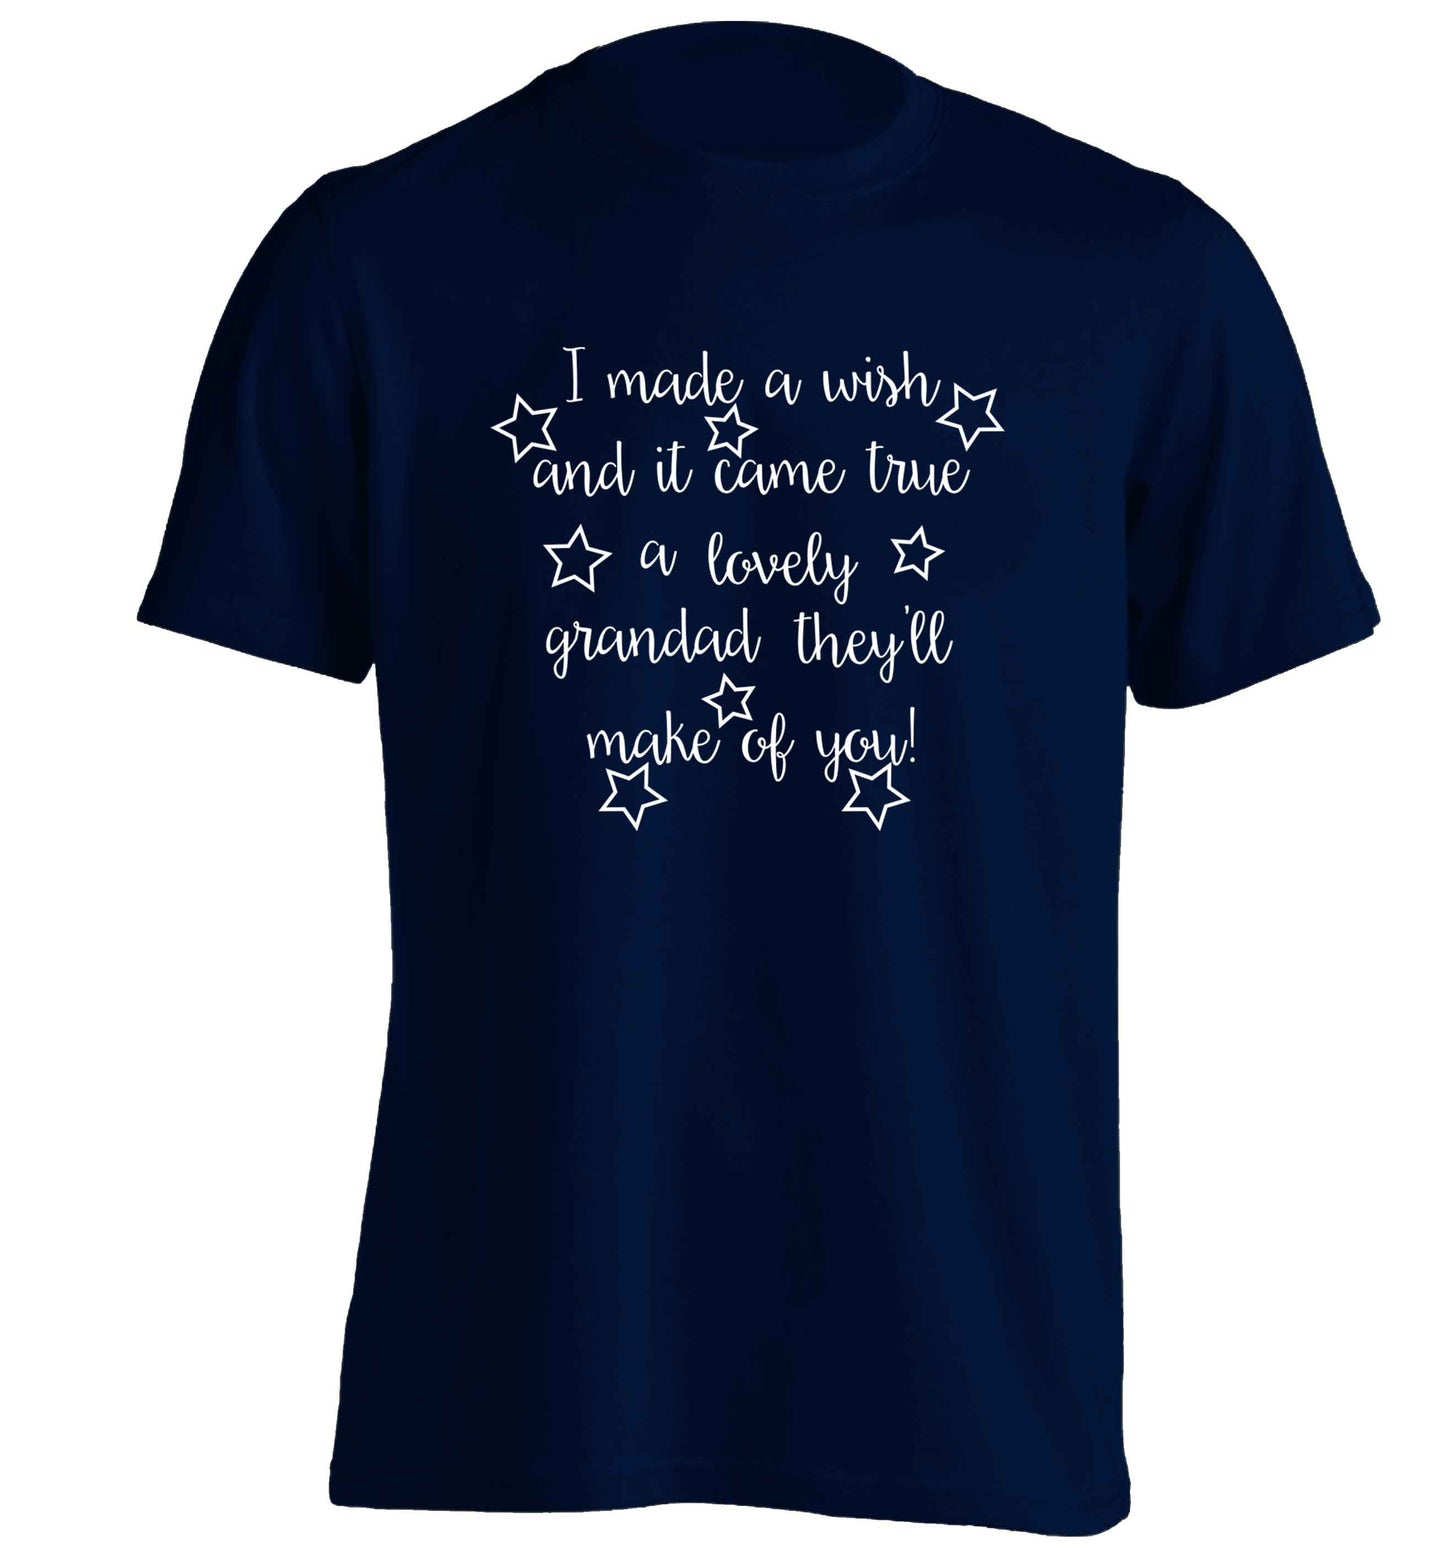 I made a wish and it came true a lovely grandad they'll make of you! adults unisex navy Tshirt 2XL